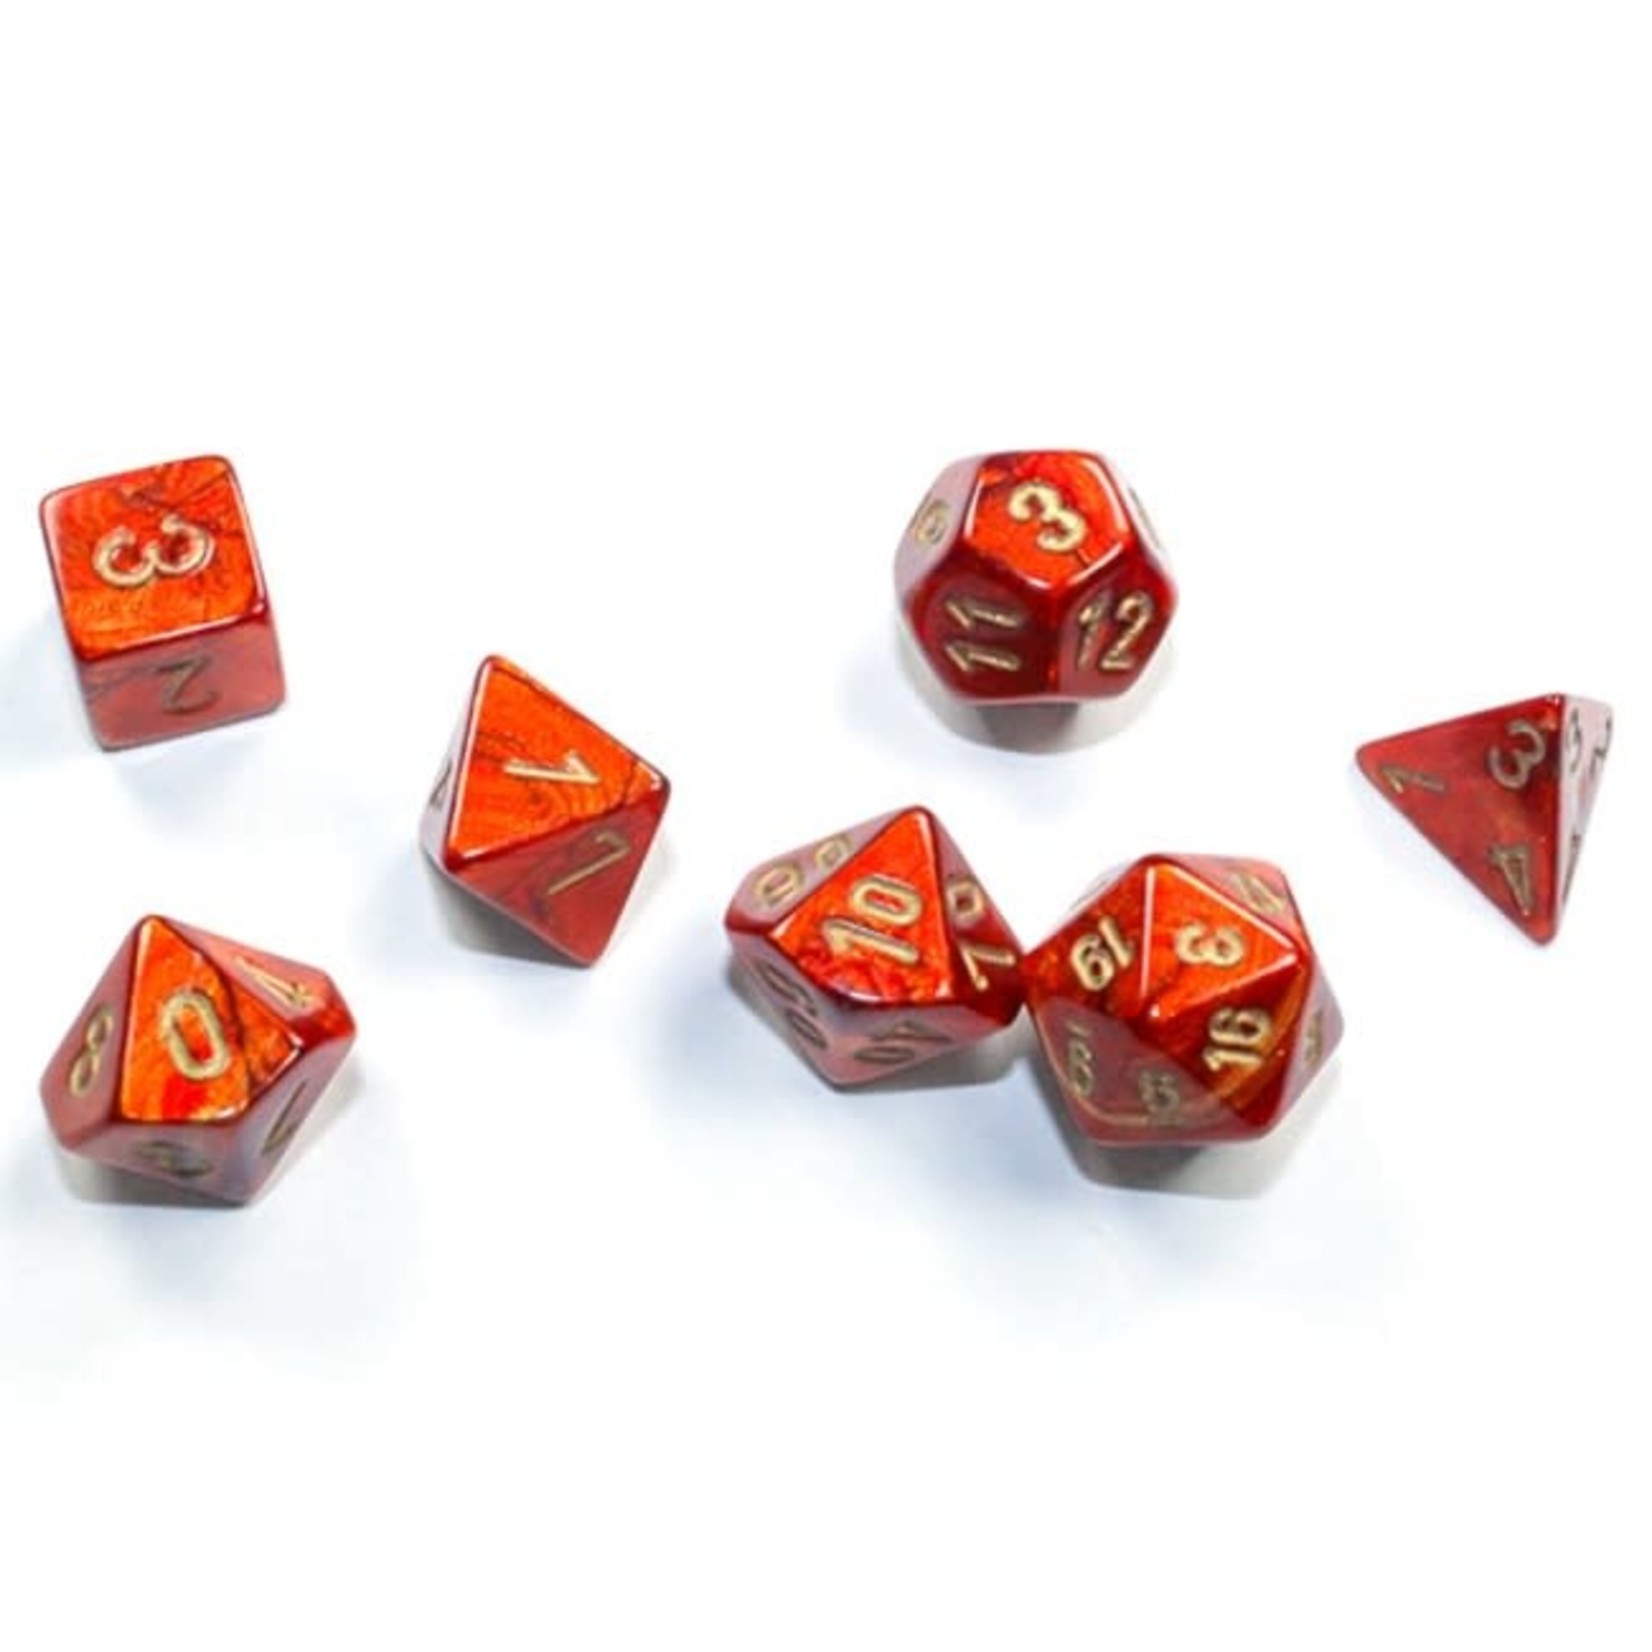 Chessex Mini 7-Die Set: Scarab Scarlet with gold